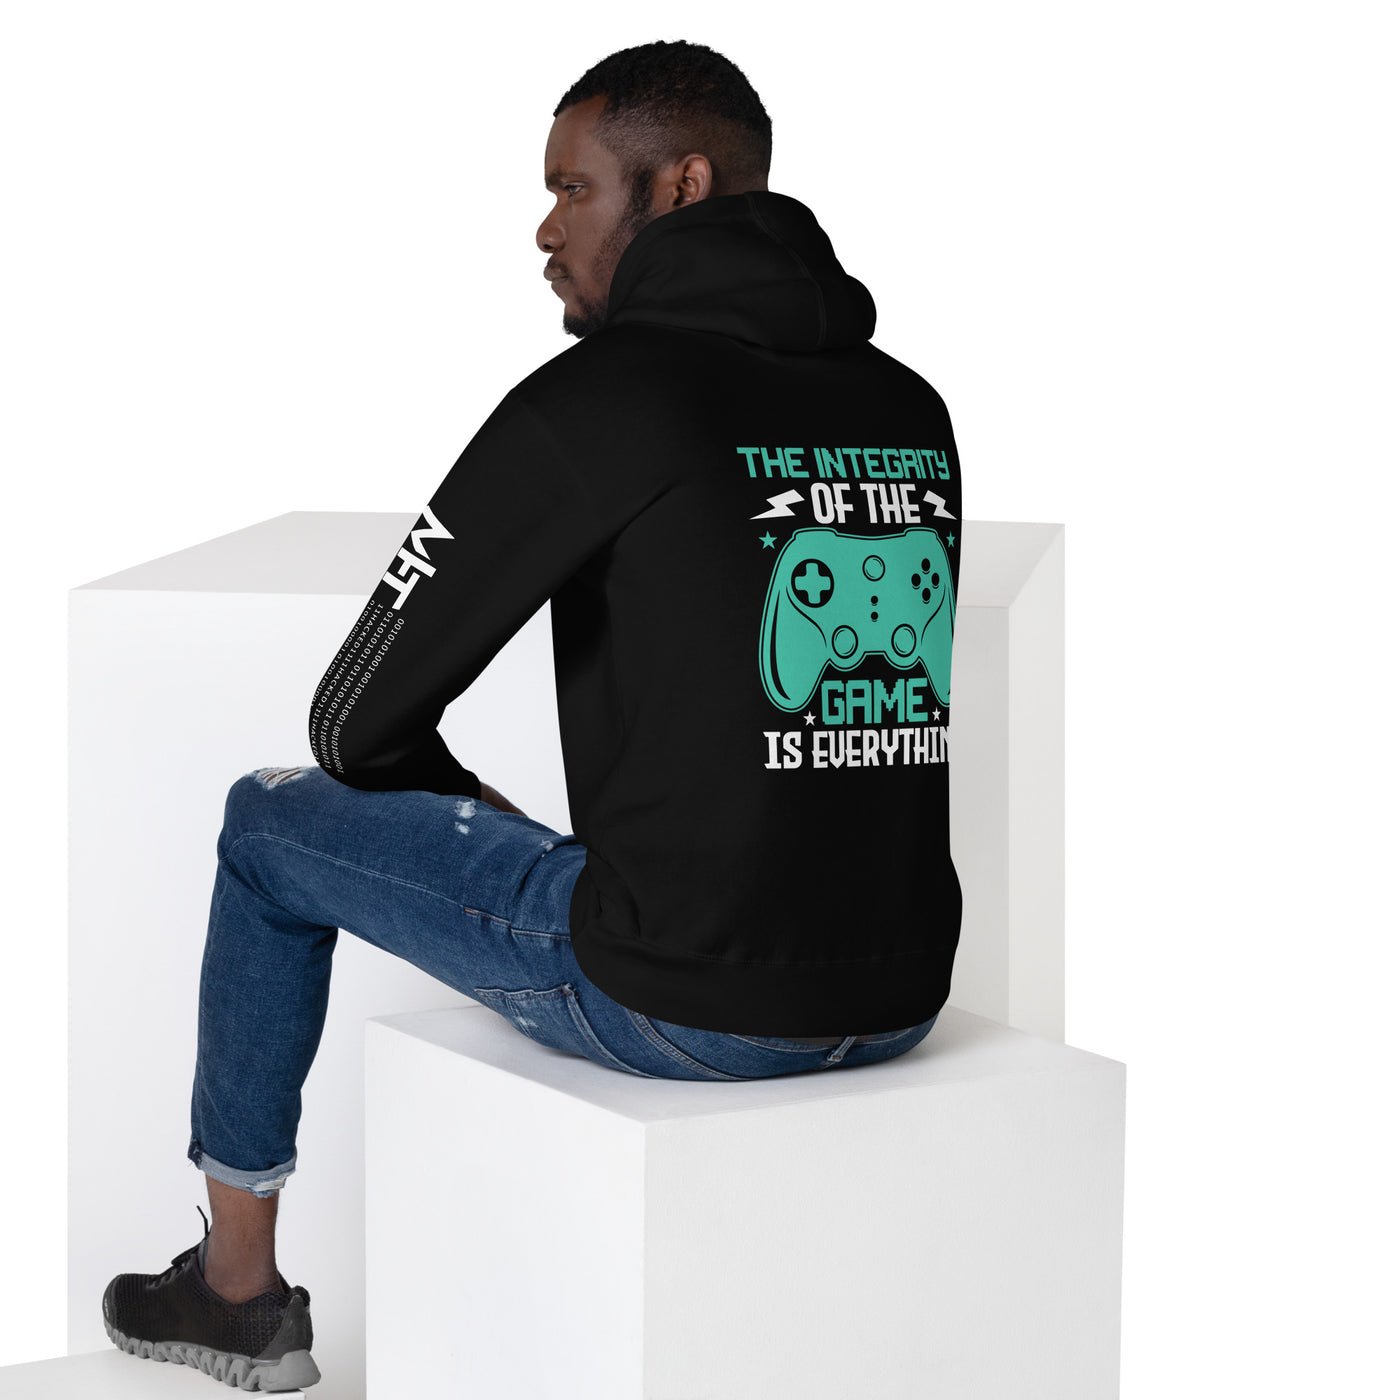 The integrity of the Game is Everything (Swarna) - Unisex Hoodie ( Back Print )